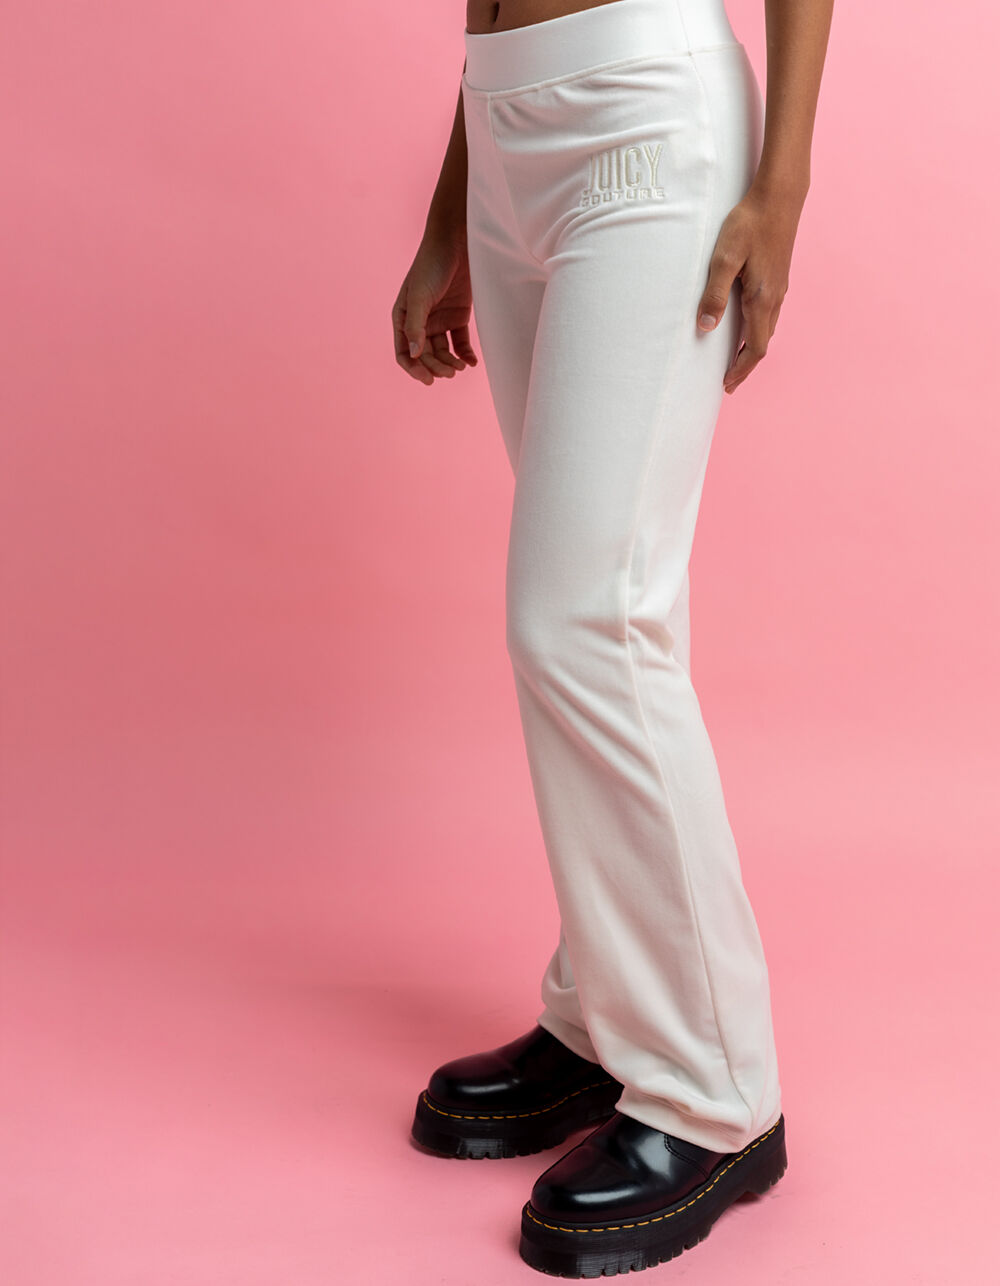 Juicy Couture Original Velour Pants in White